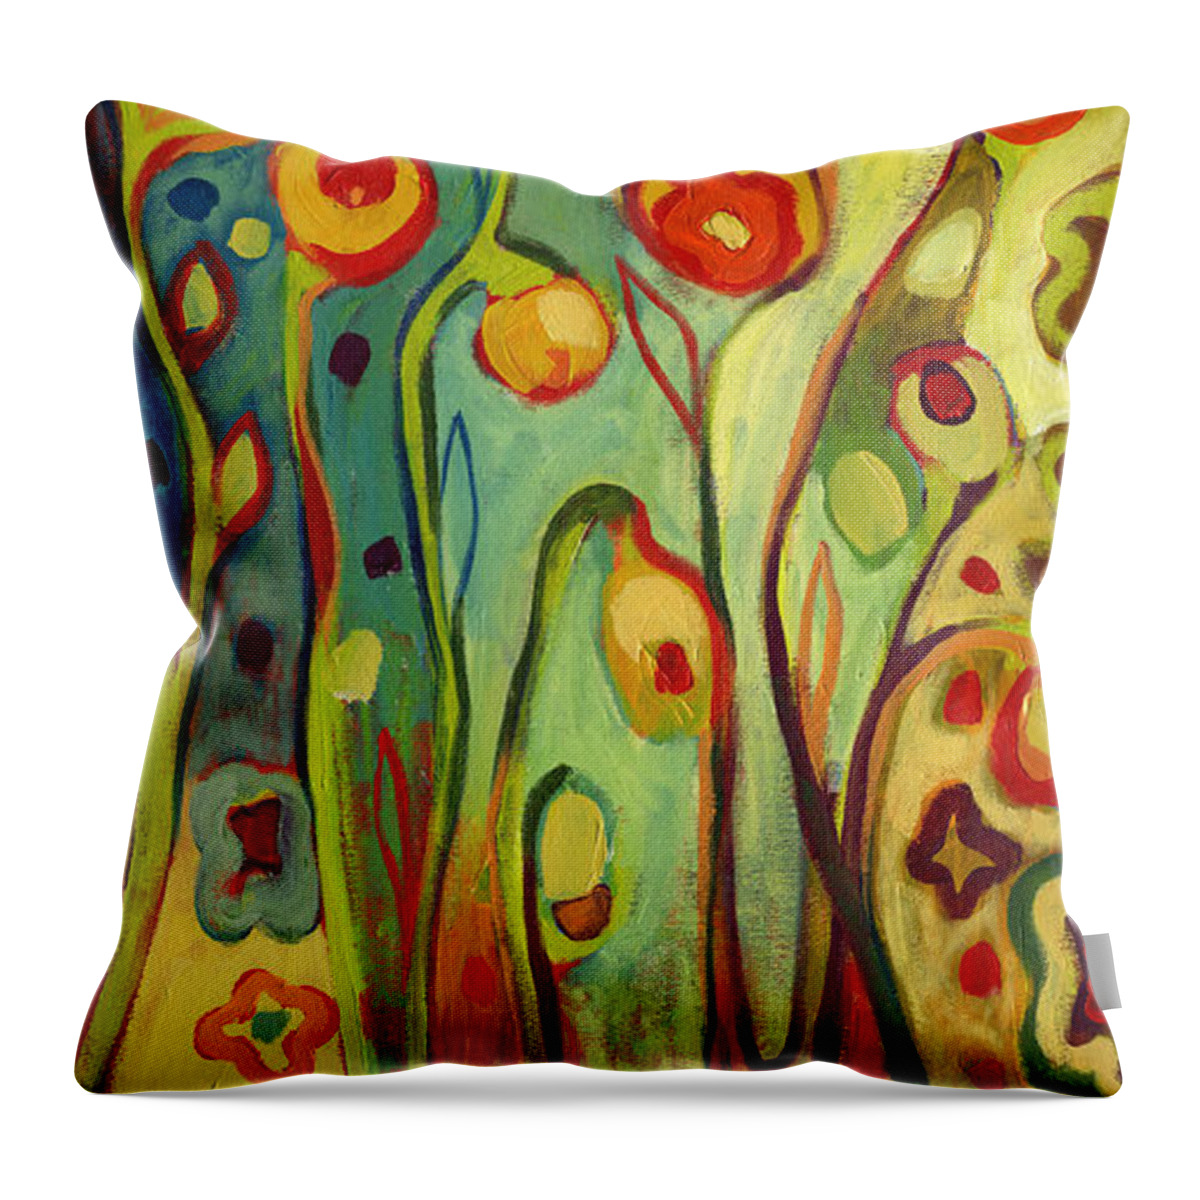 Floral Throw Pillow featuring the painting Where Does Your Garden Grow by Jennifer Lommers